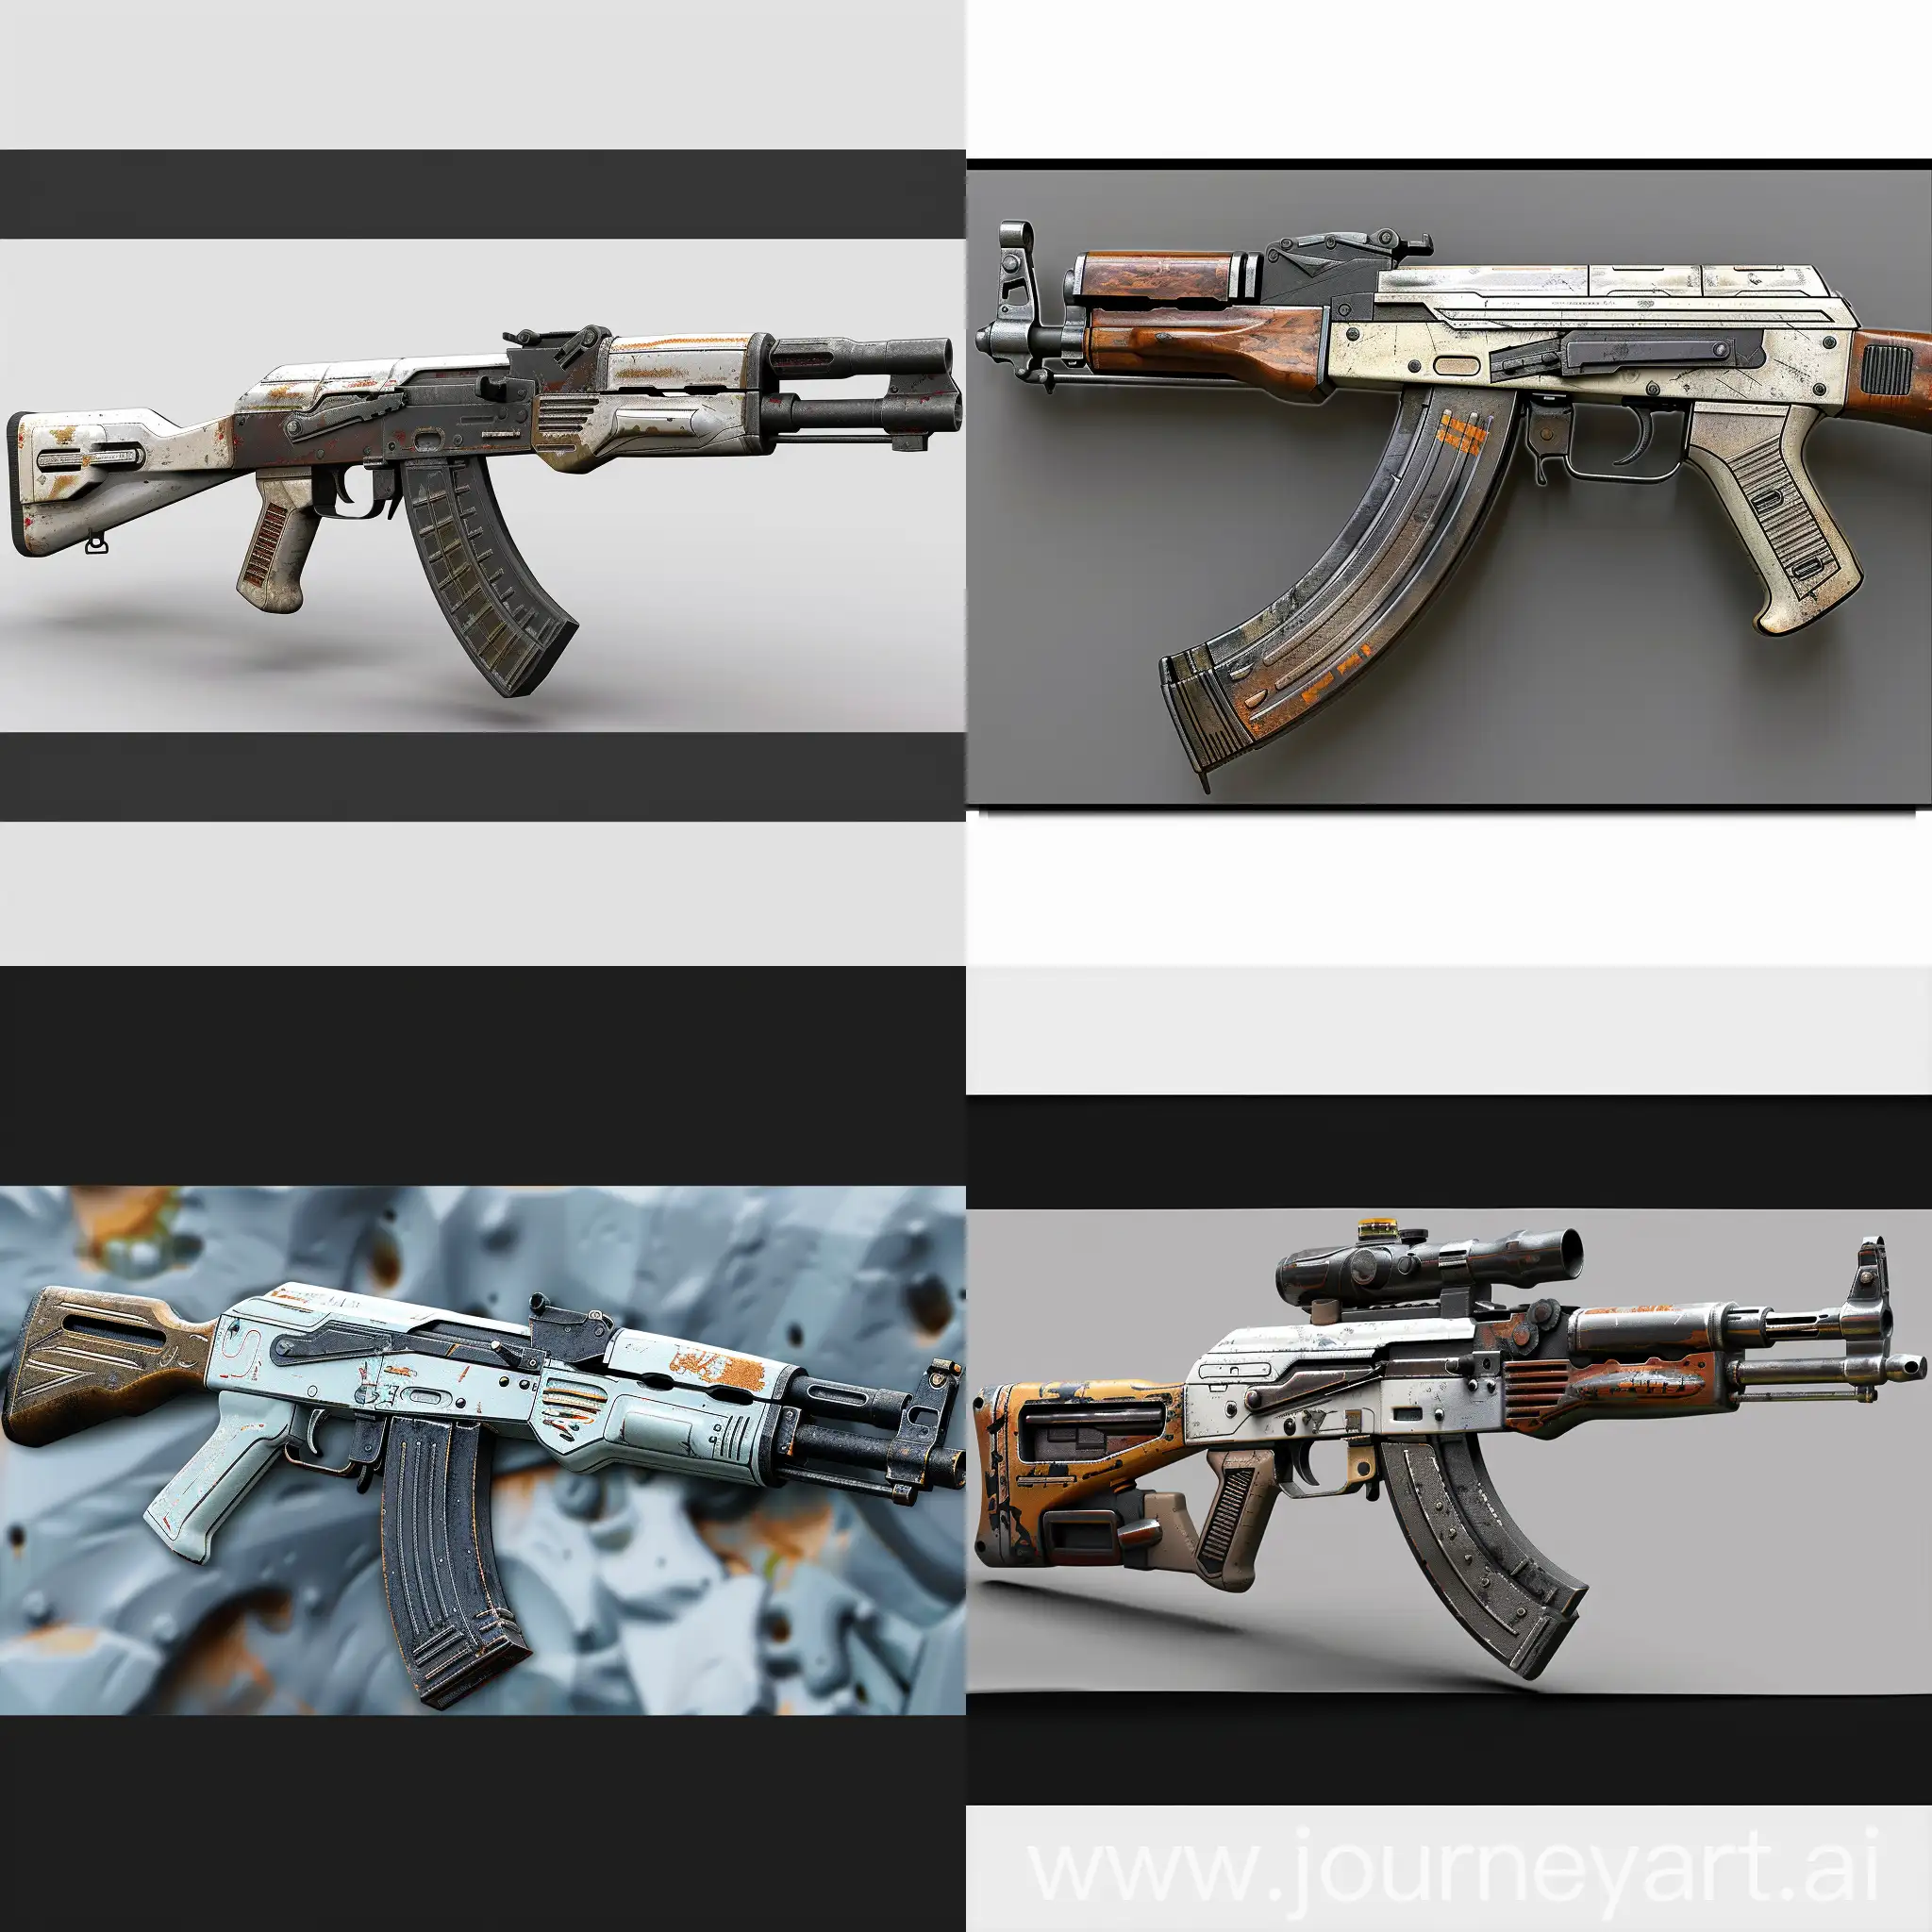 Futuristic AK-47 https://upload.wikimedia.org/wikipedia/commons/6/65/AK-47_type_II_noBG.png, Biodegradable Materials, Solar-Powered Accessories, Recycled Metal, Carbon Neutral Production, Modular Design, Reduced Recoil Mechanism, Efficient Ammunition. Smart Technology, Integrated Suppressor, Sustainable Packaging, Self-Cleaning Mechanism, Nano-Enhanced Ammunition, Smart Sensors, Self-Healing Materials, Nanocomposite Construction, Nano-Enhanced Optics, Nano-Enhanced Lubricants, Nanoparticle Filters, Nanotech Trigger Mechanism, Stealth Coating, octane render --stylize 1000